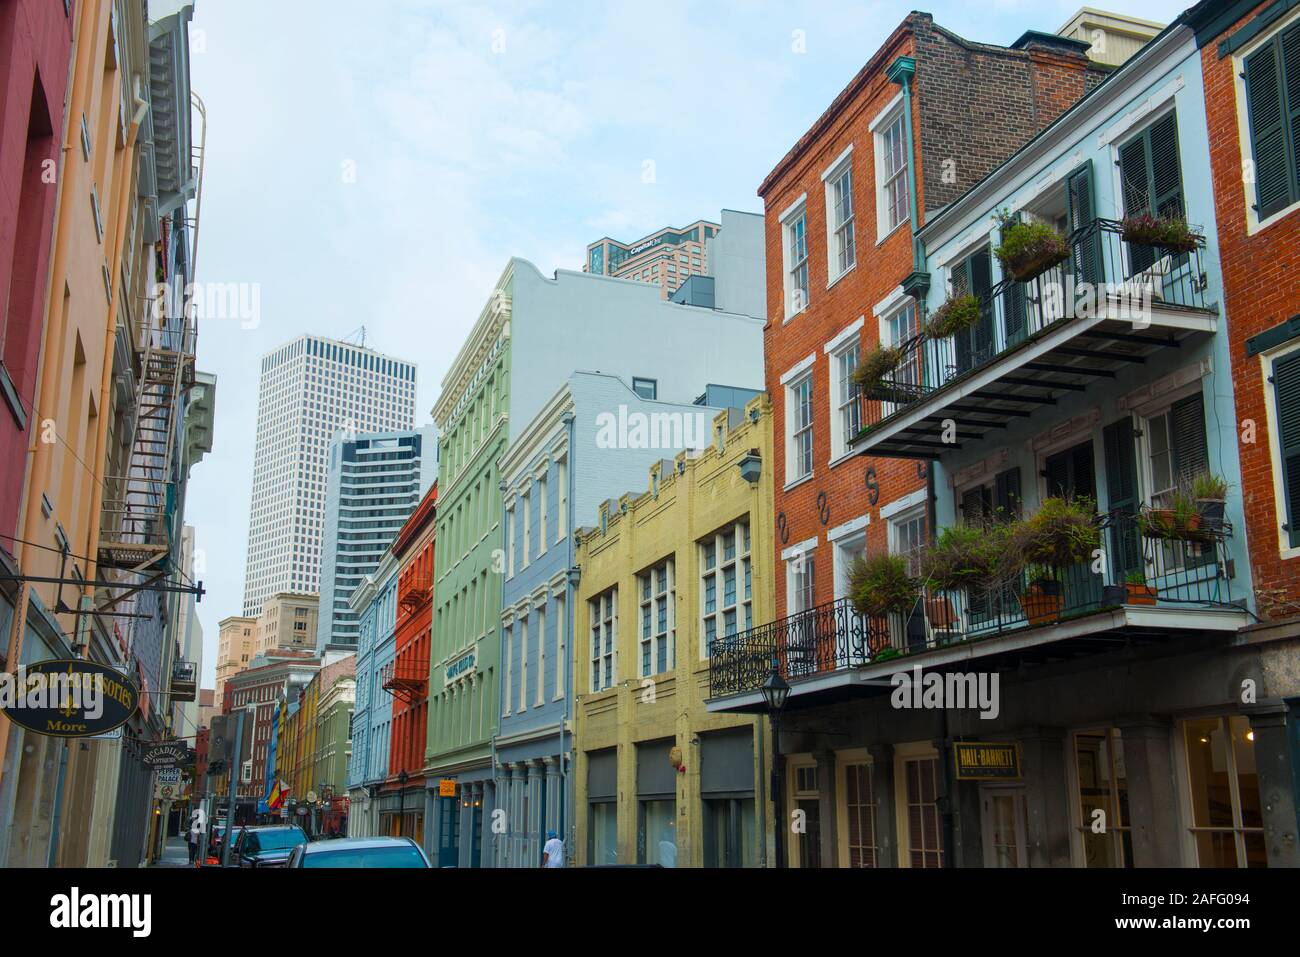 Historic Buildings on Chartres Street between Iberville Street and Bienville Street in French Quarter in New Orleans, Louisiana, USA. Stock Photo